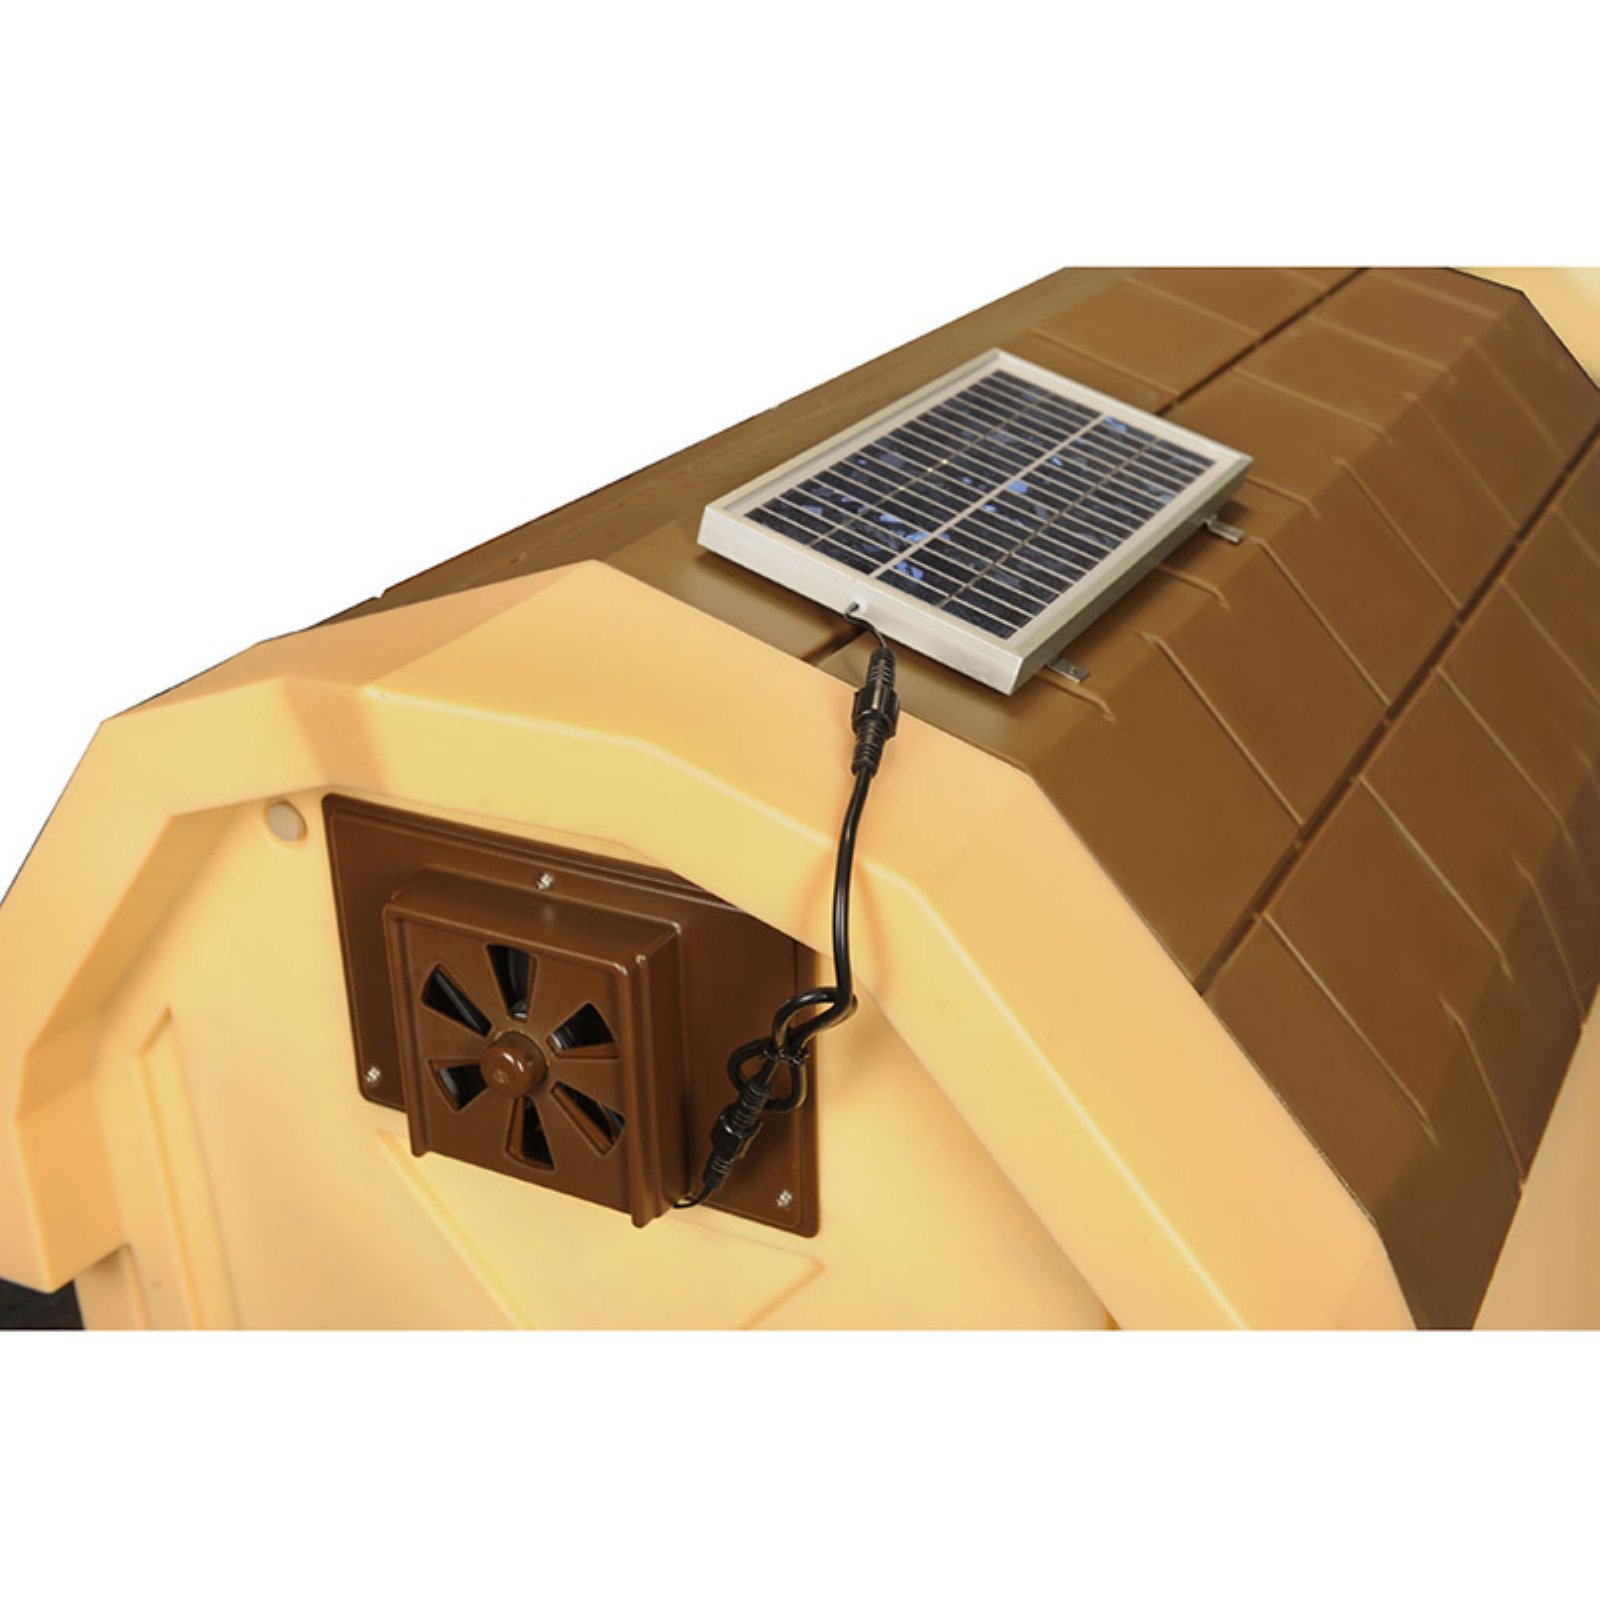 Dog Palace Breeze Solar Powered Exhaust Fan for Dog House, Large - image 2 of 6